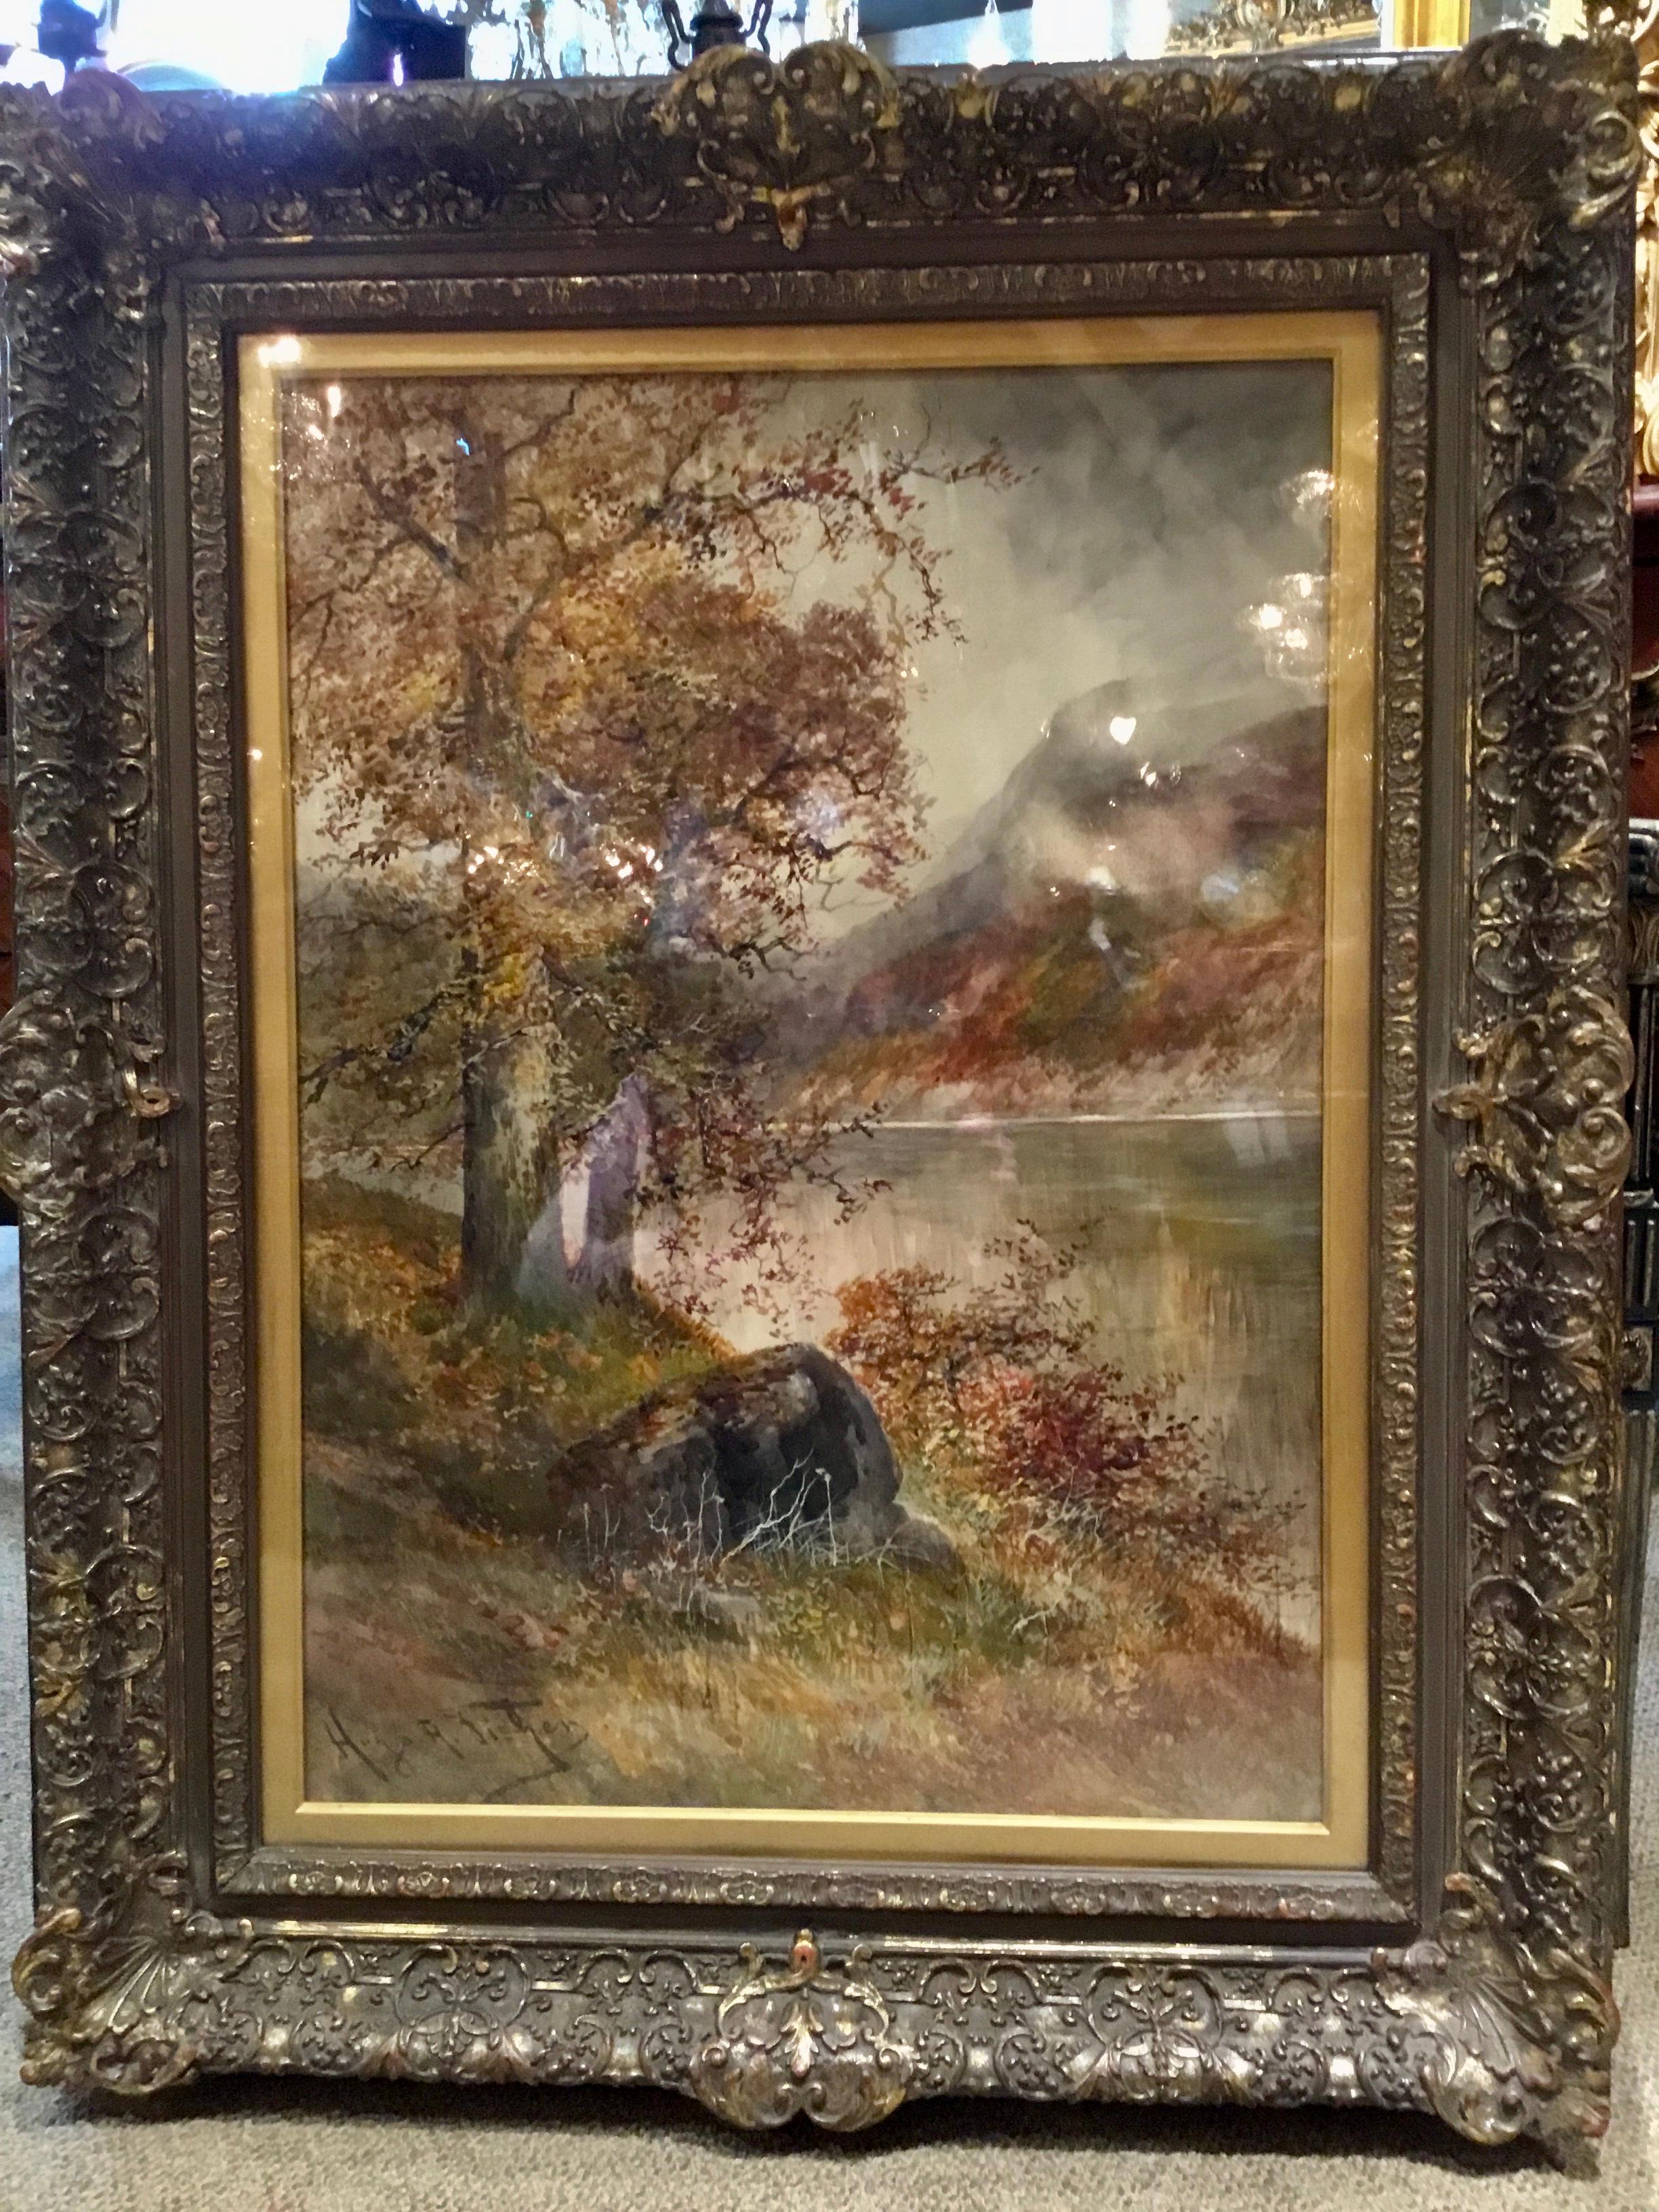 Watercolor Landscape Painting in Antique Frame by Hugo A. Fisher 1854-1916 1